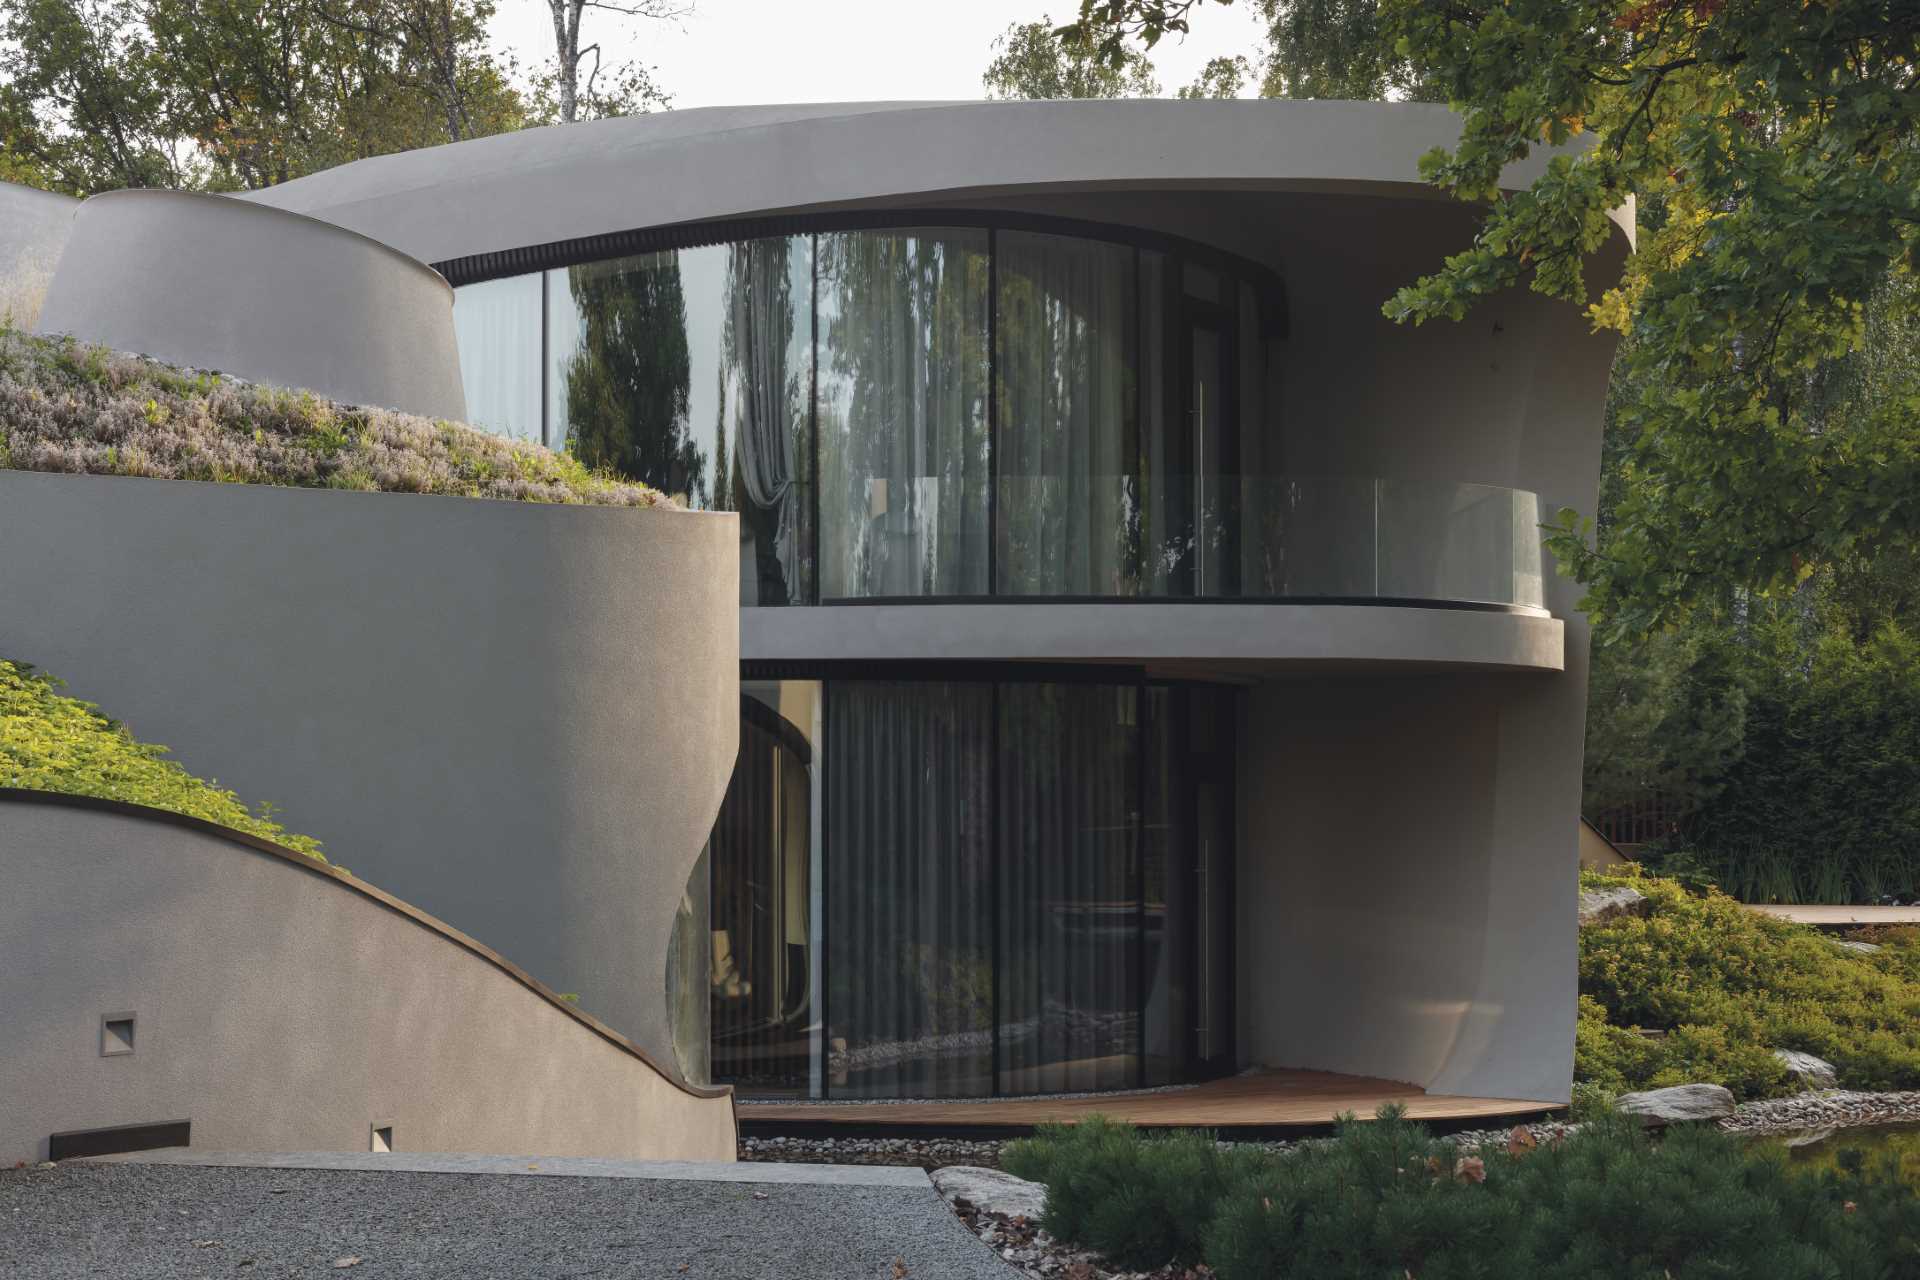 A modern sculptural home with curves that's been built into an artificially created landscape.